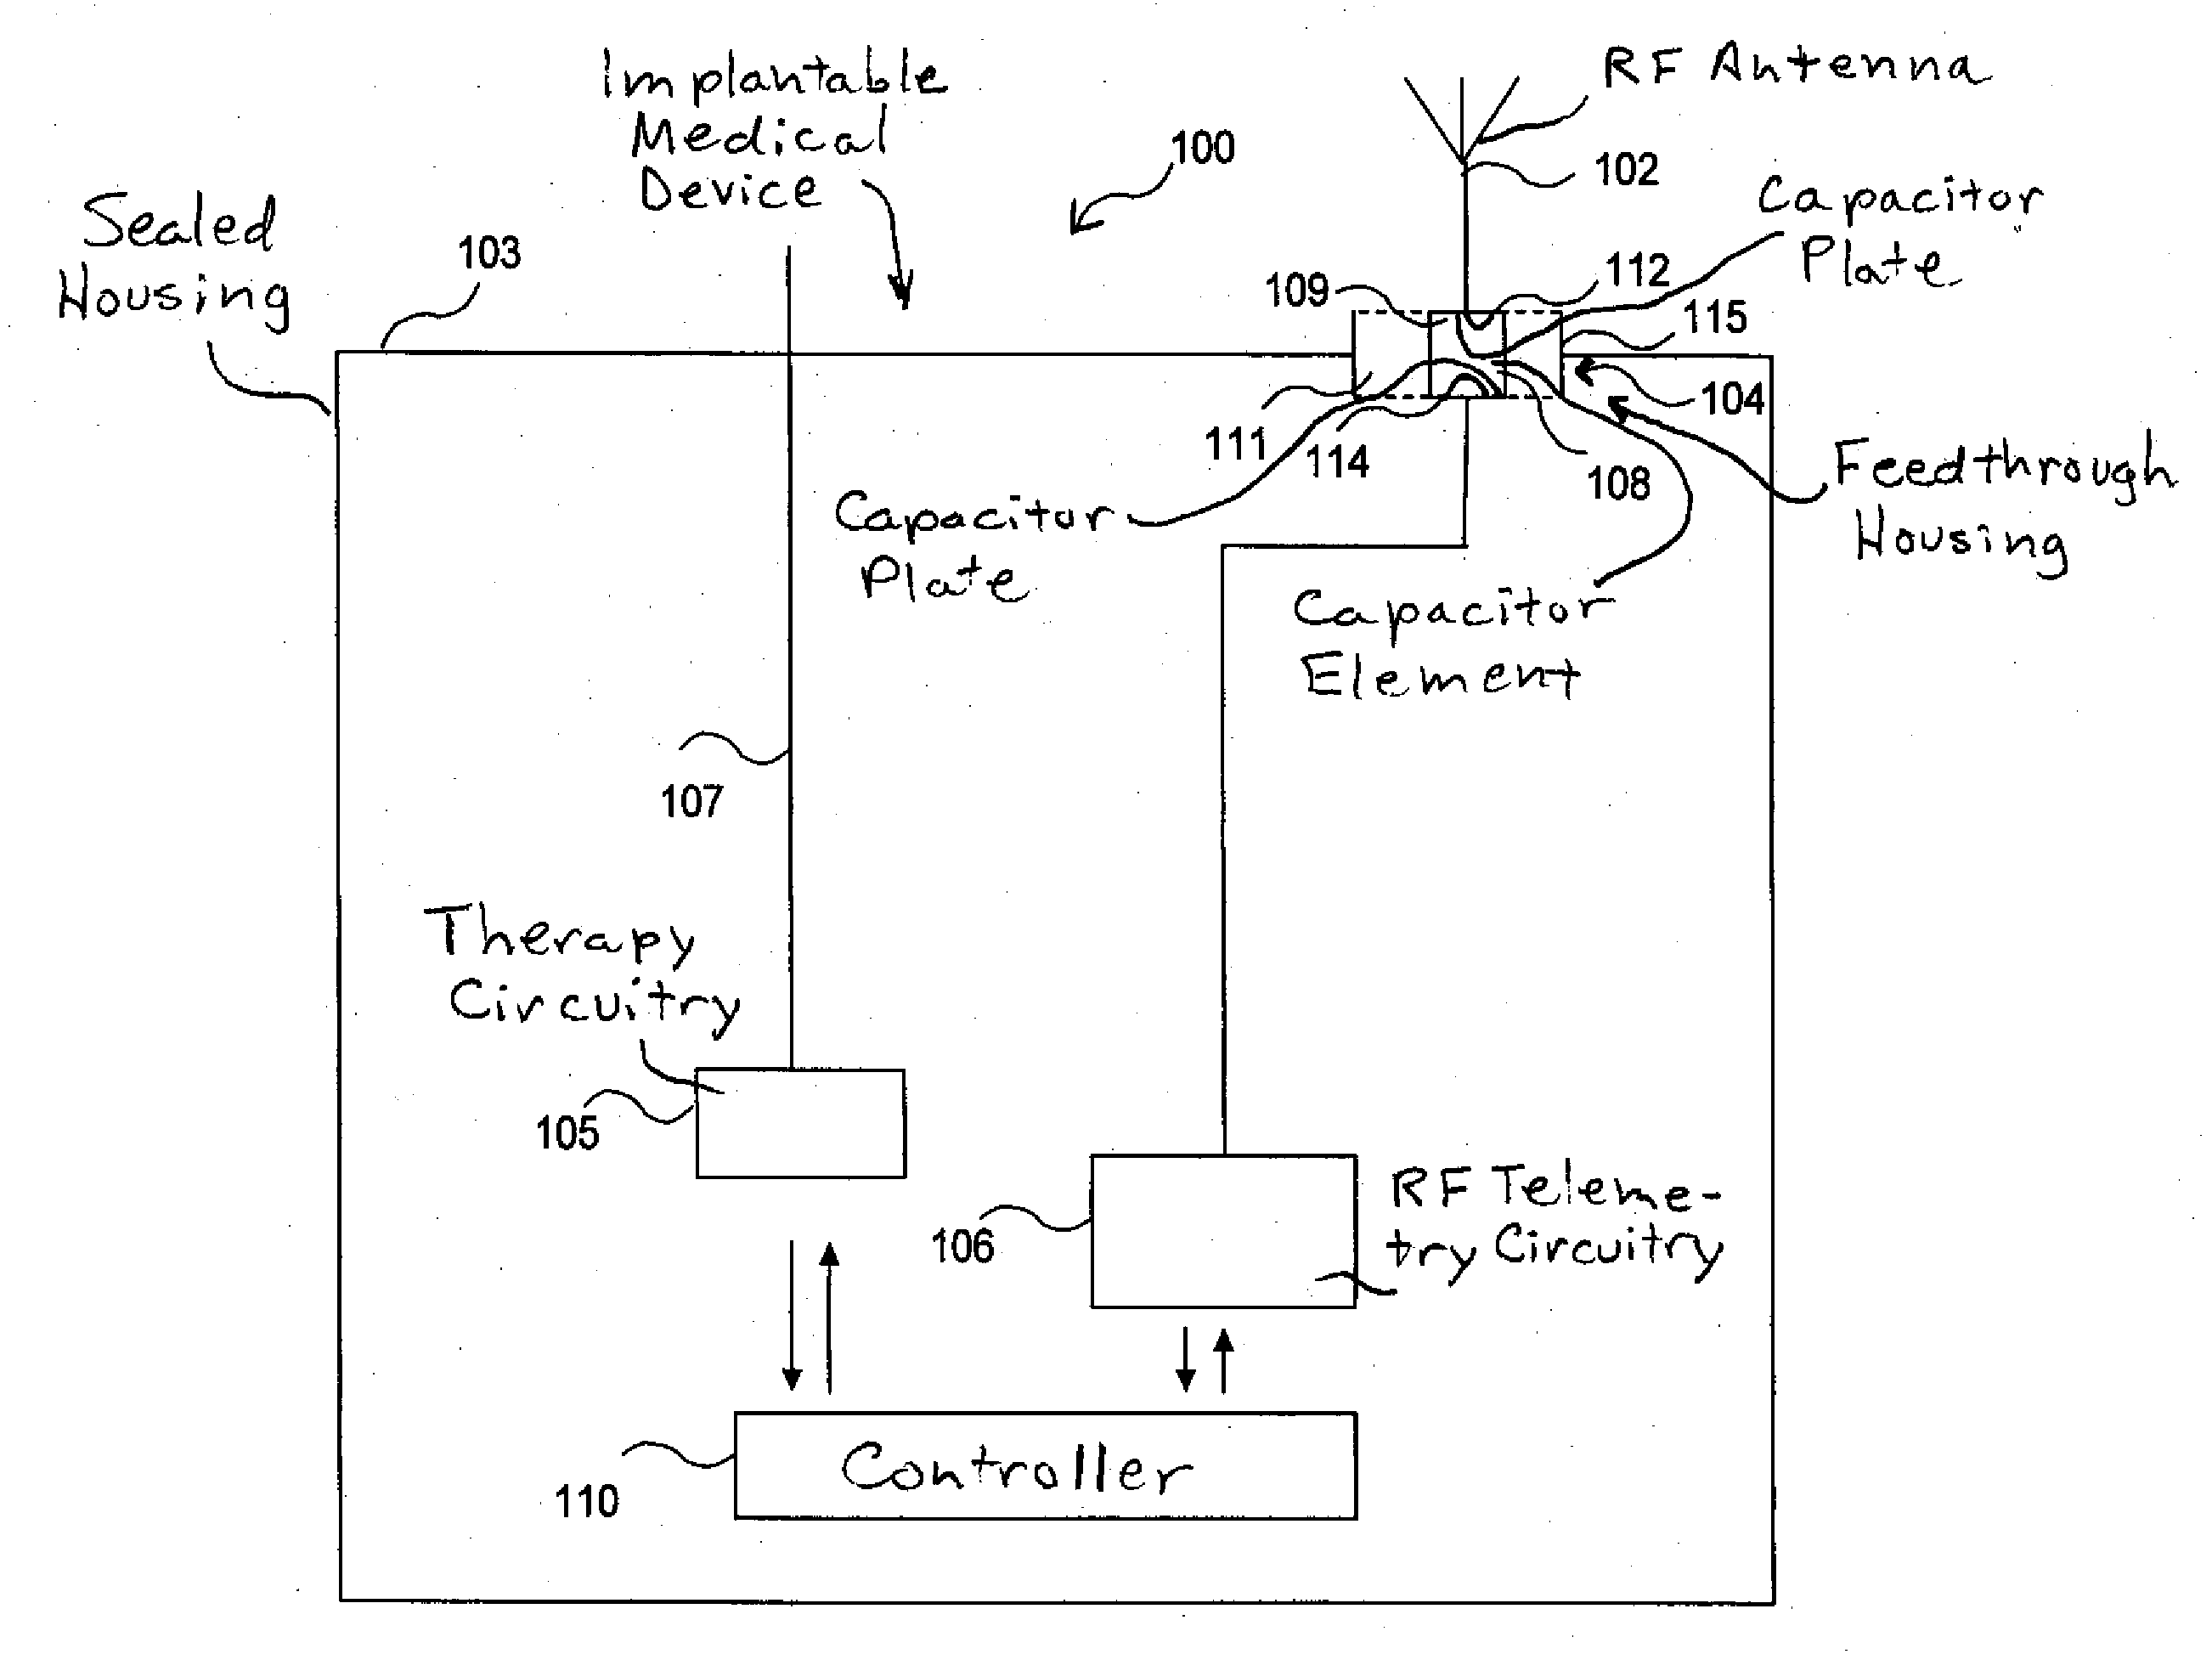 Implantable Medical Device with a Voltage Protection Circuit